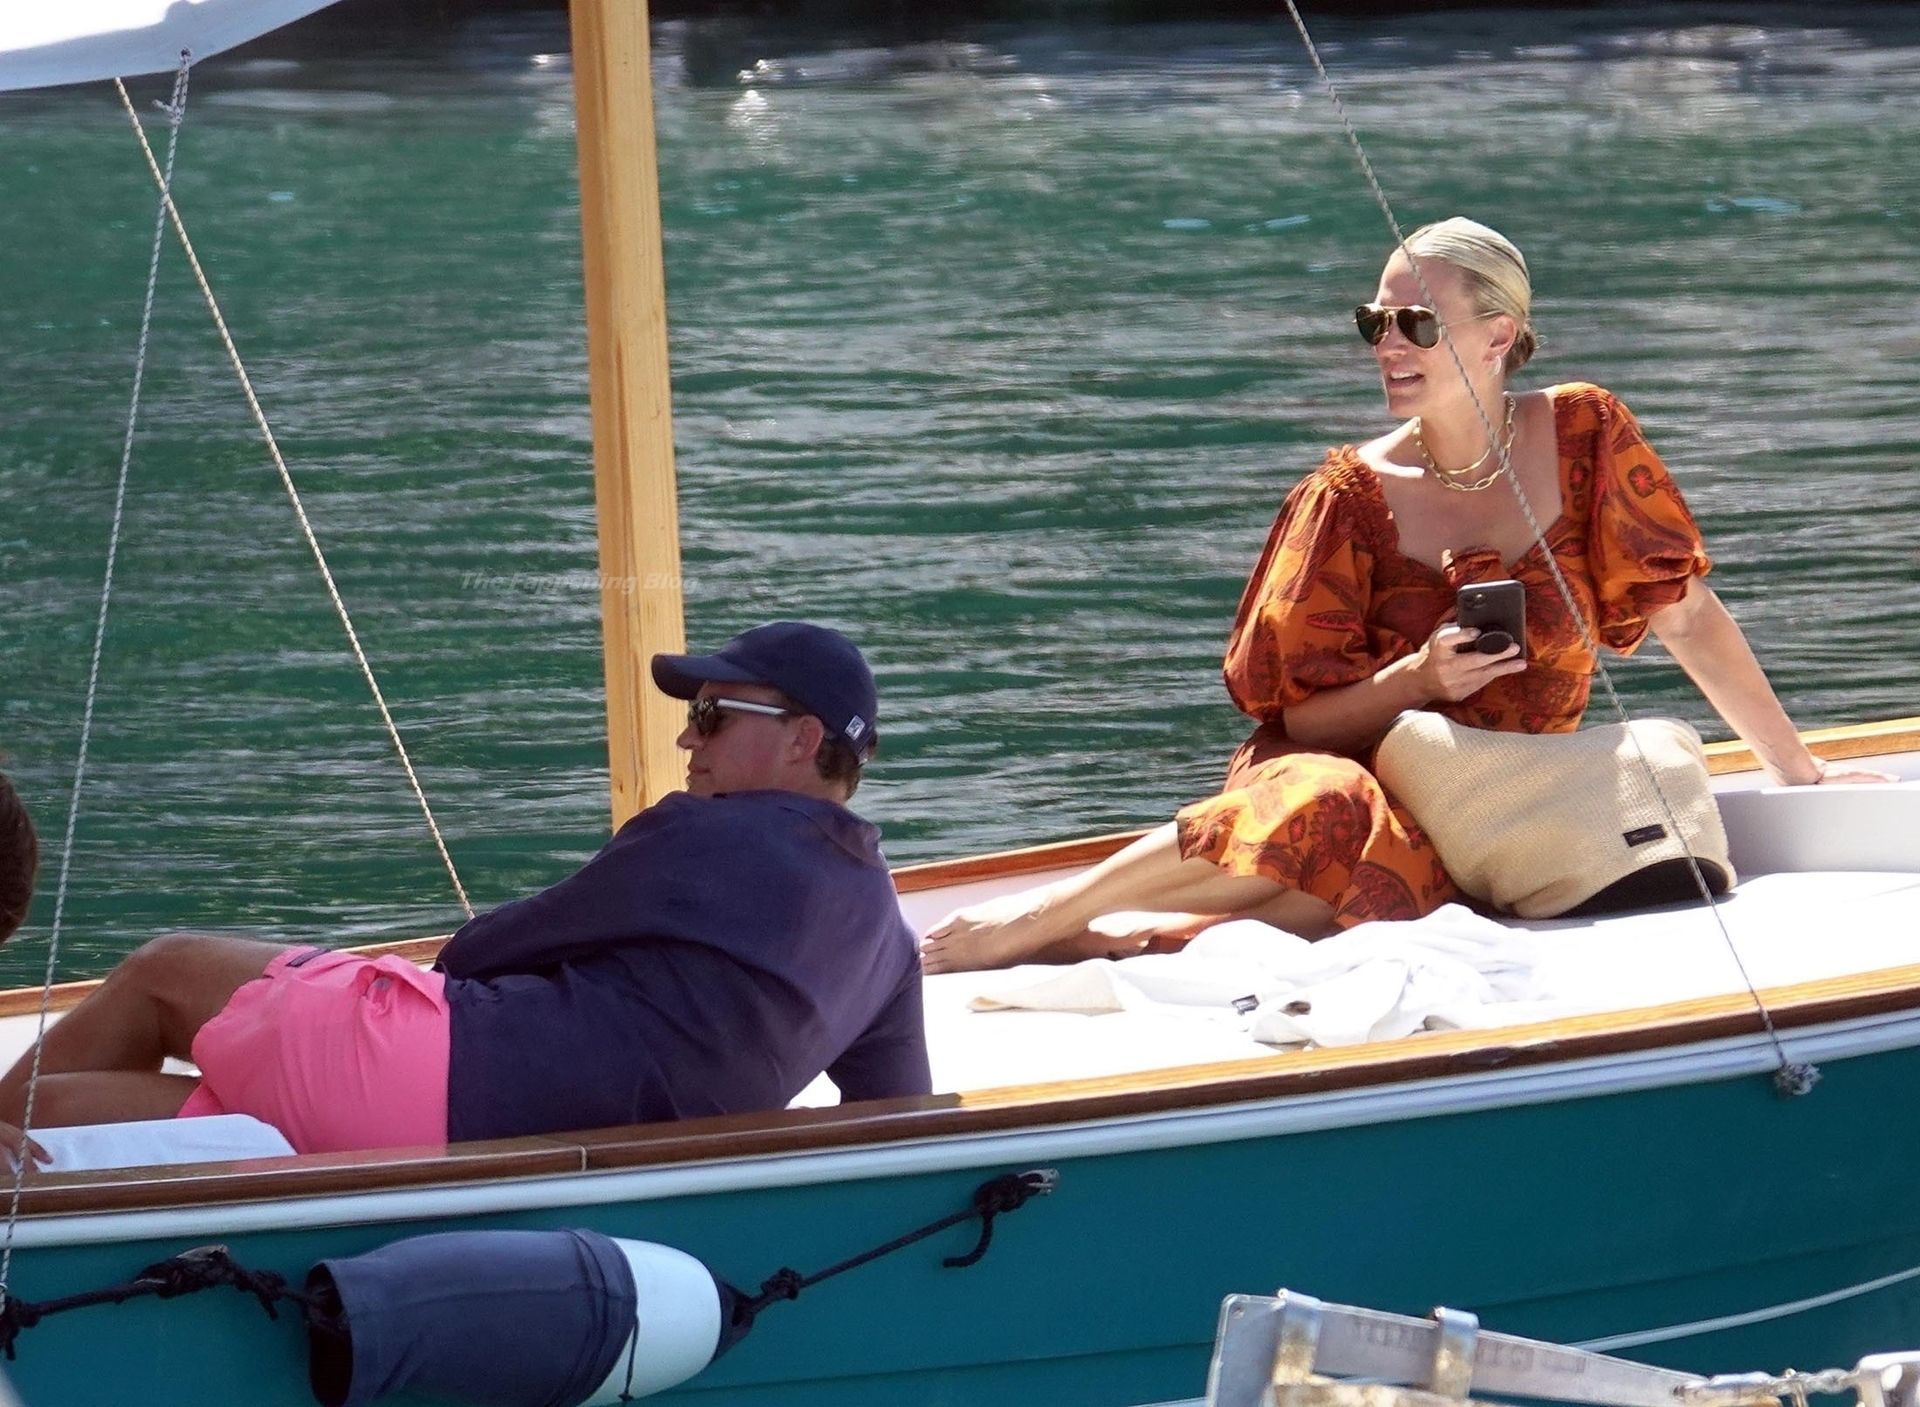 Molly Sims & Scott Stuber Enjoy a Relaxing Sea Holiday in Capri (62 Photos) [Updated]